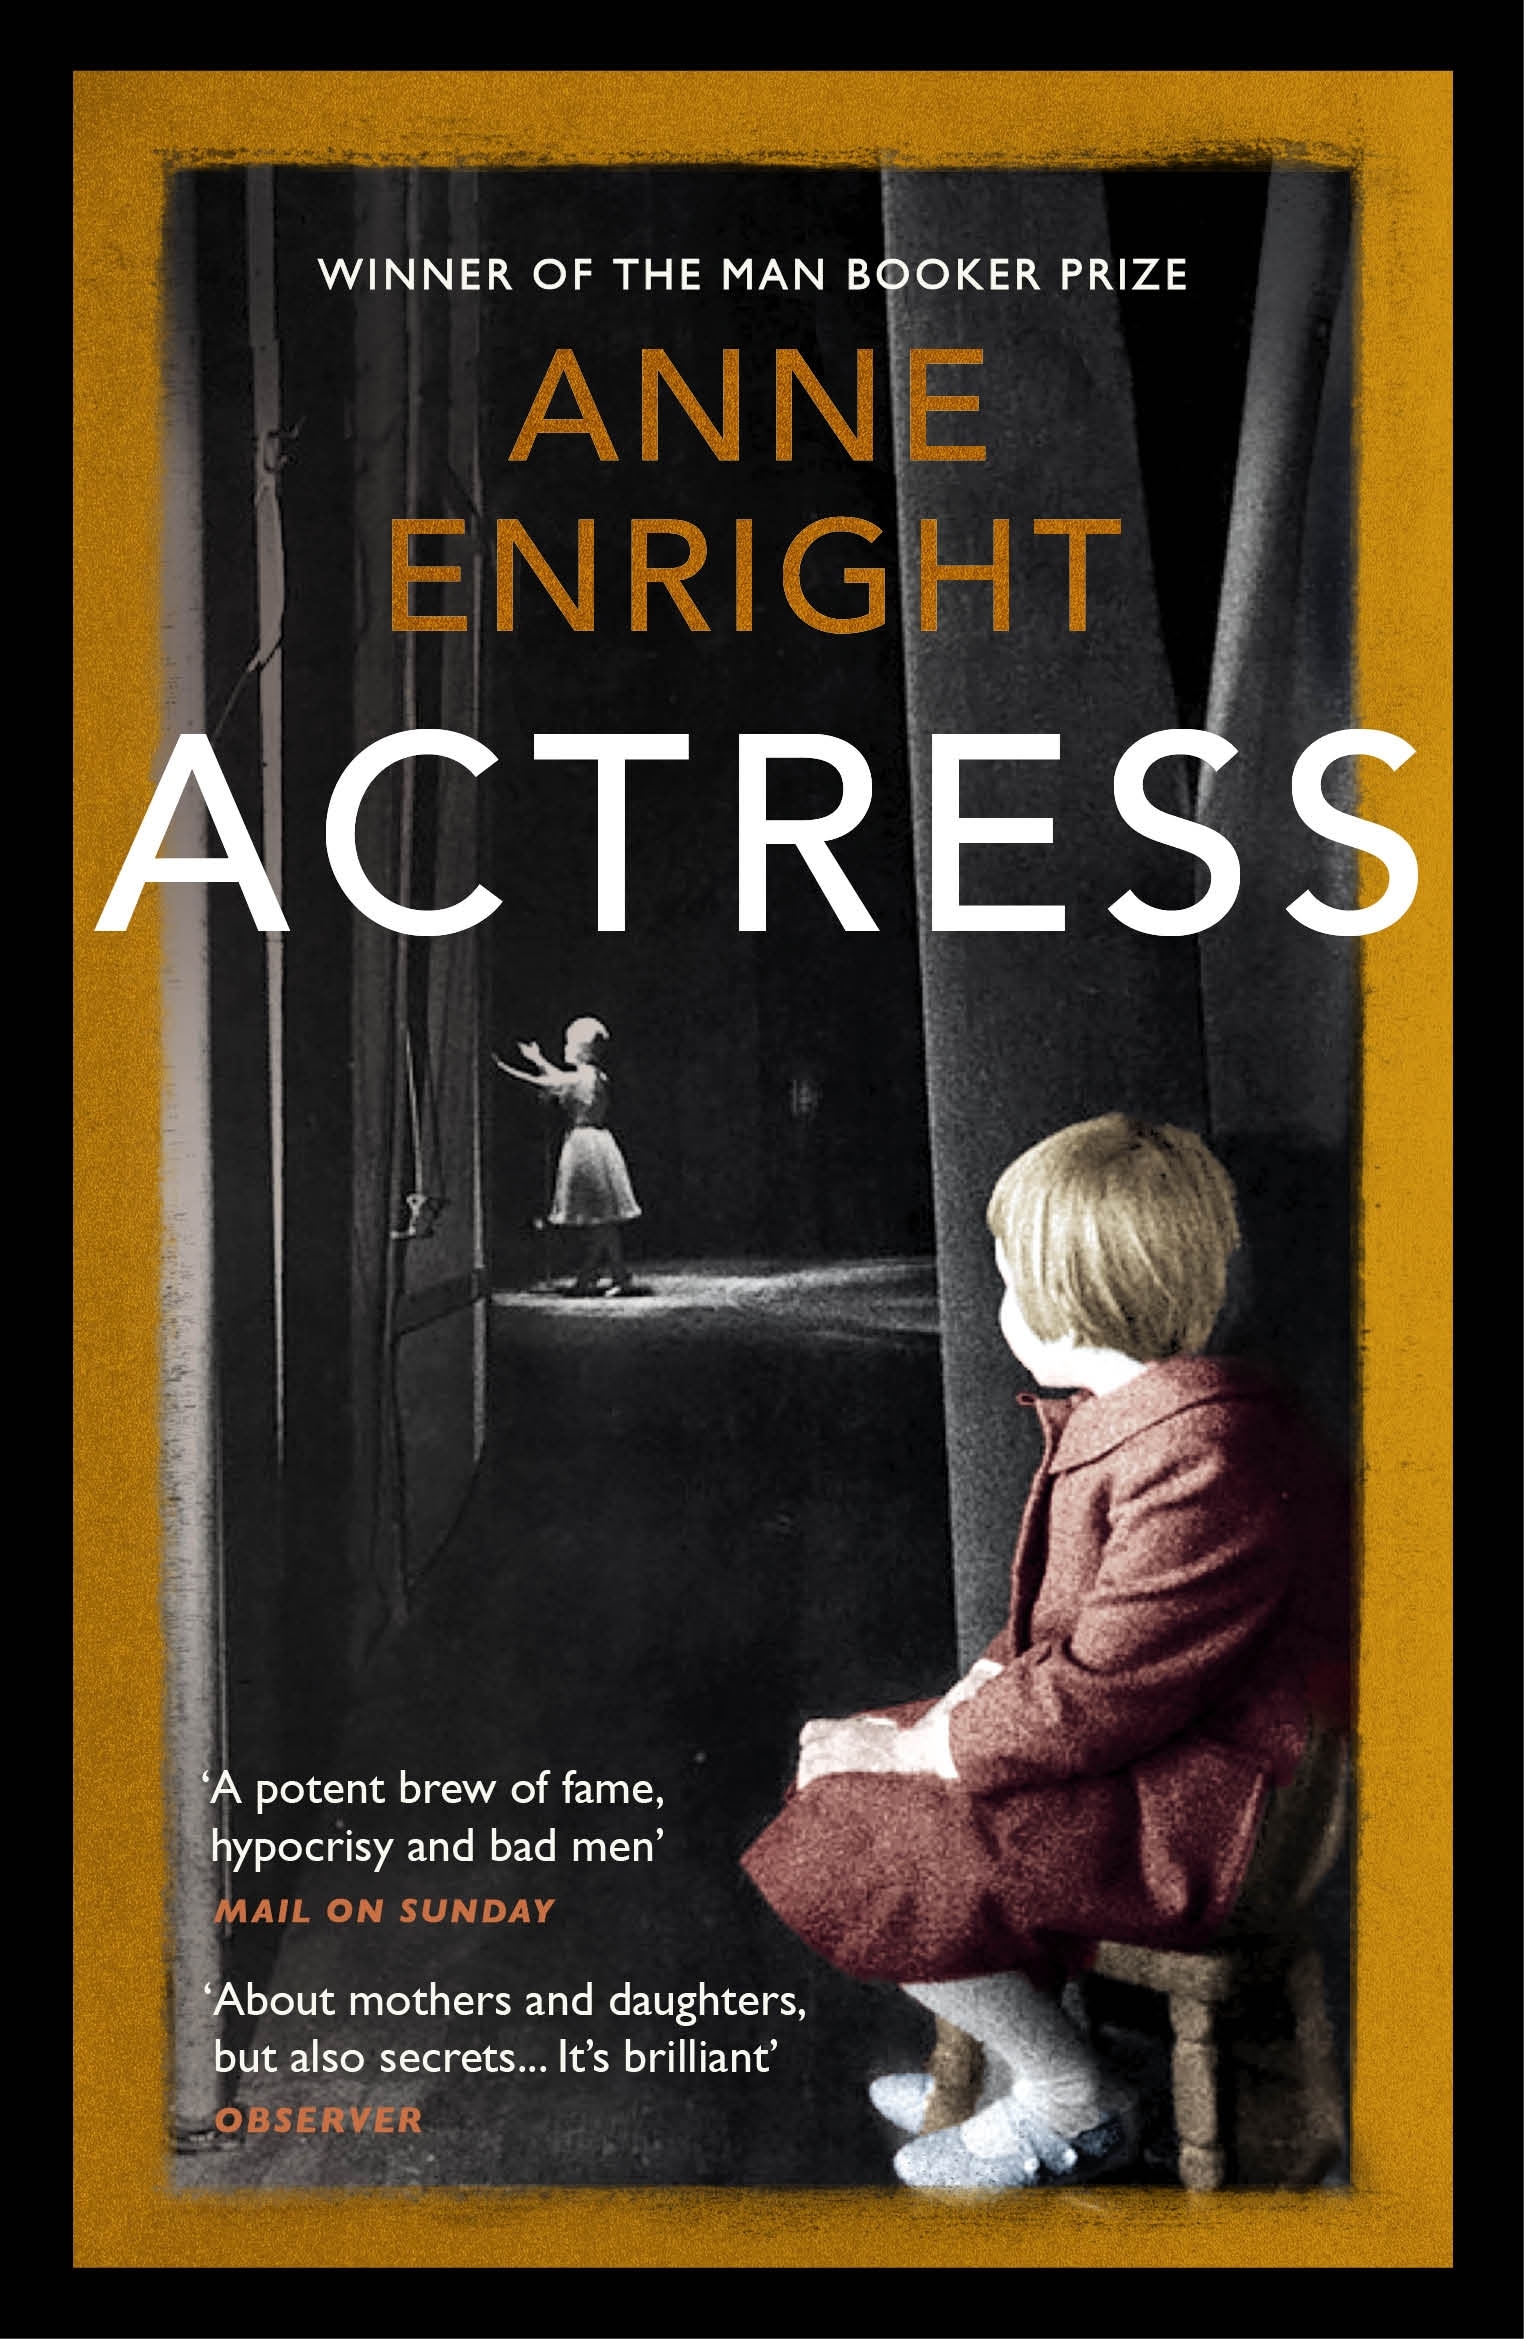 Book “Actress” by Anne Enright — June 17, 2021